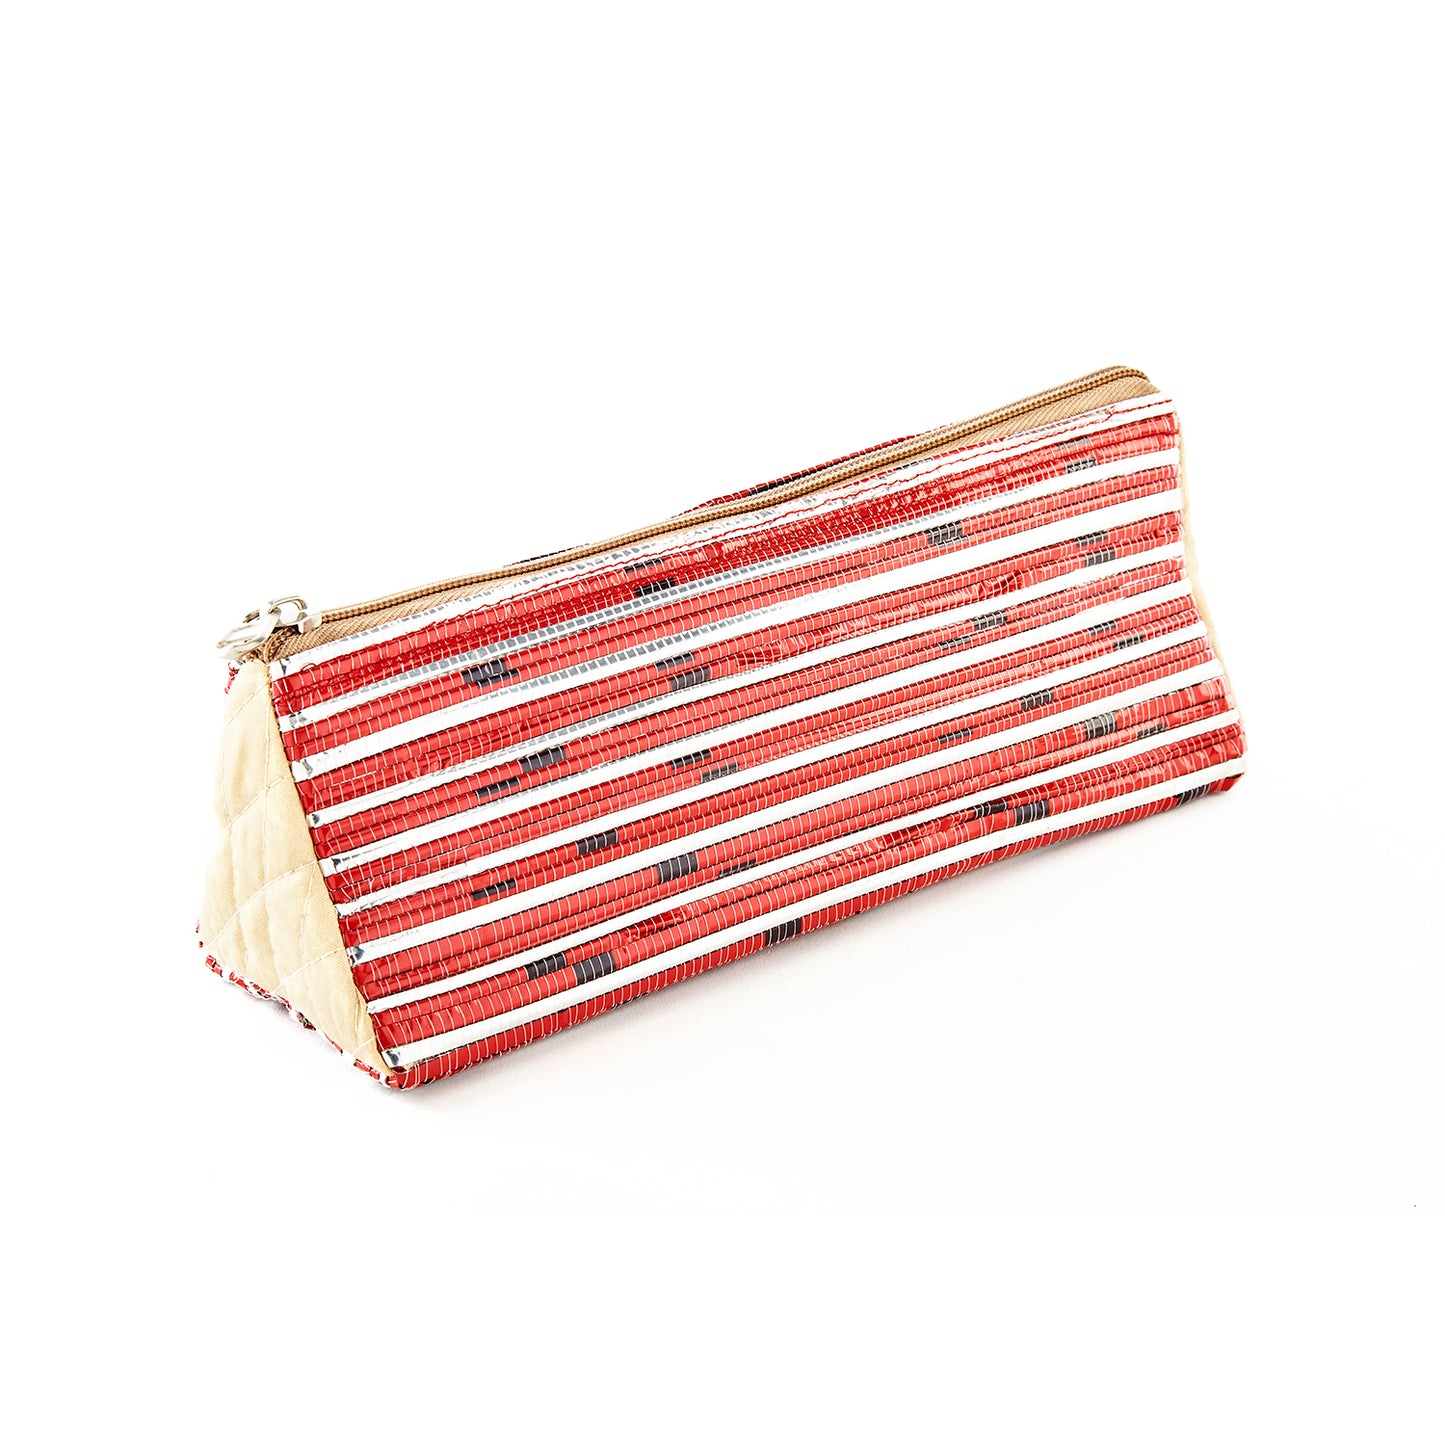 Red & Silver Recycled Plastic Pencil Pouch (MLP Plastic)